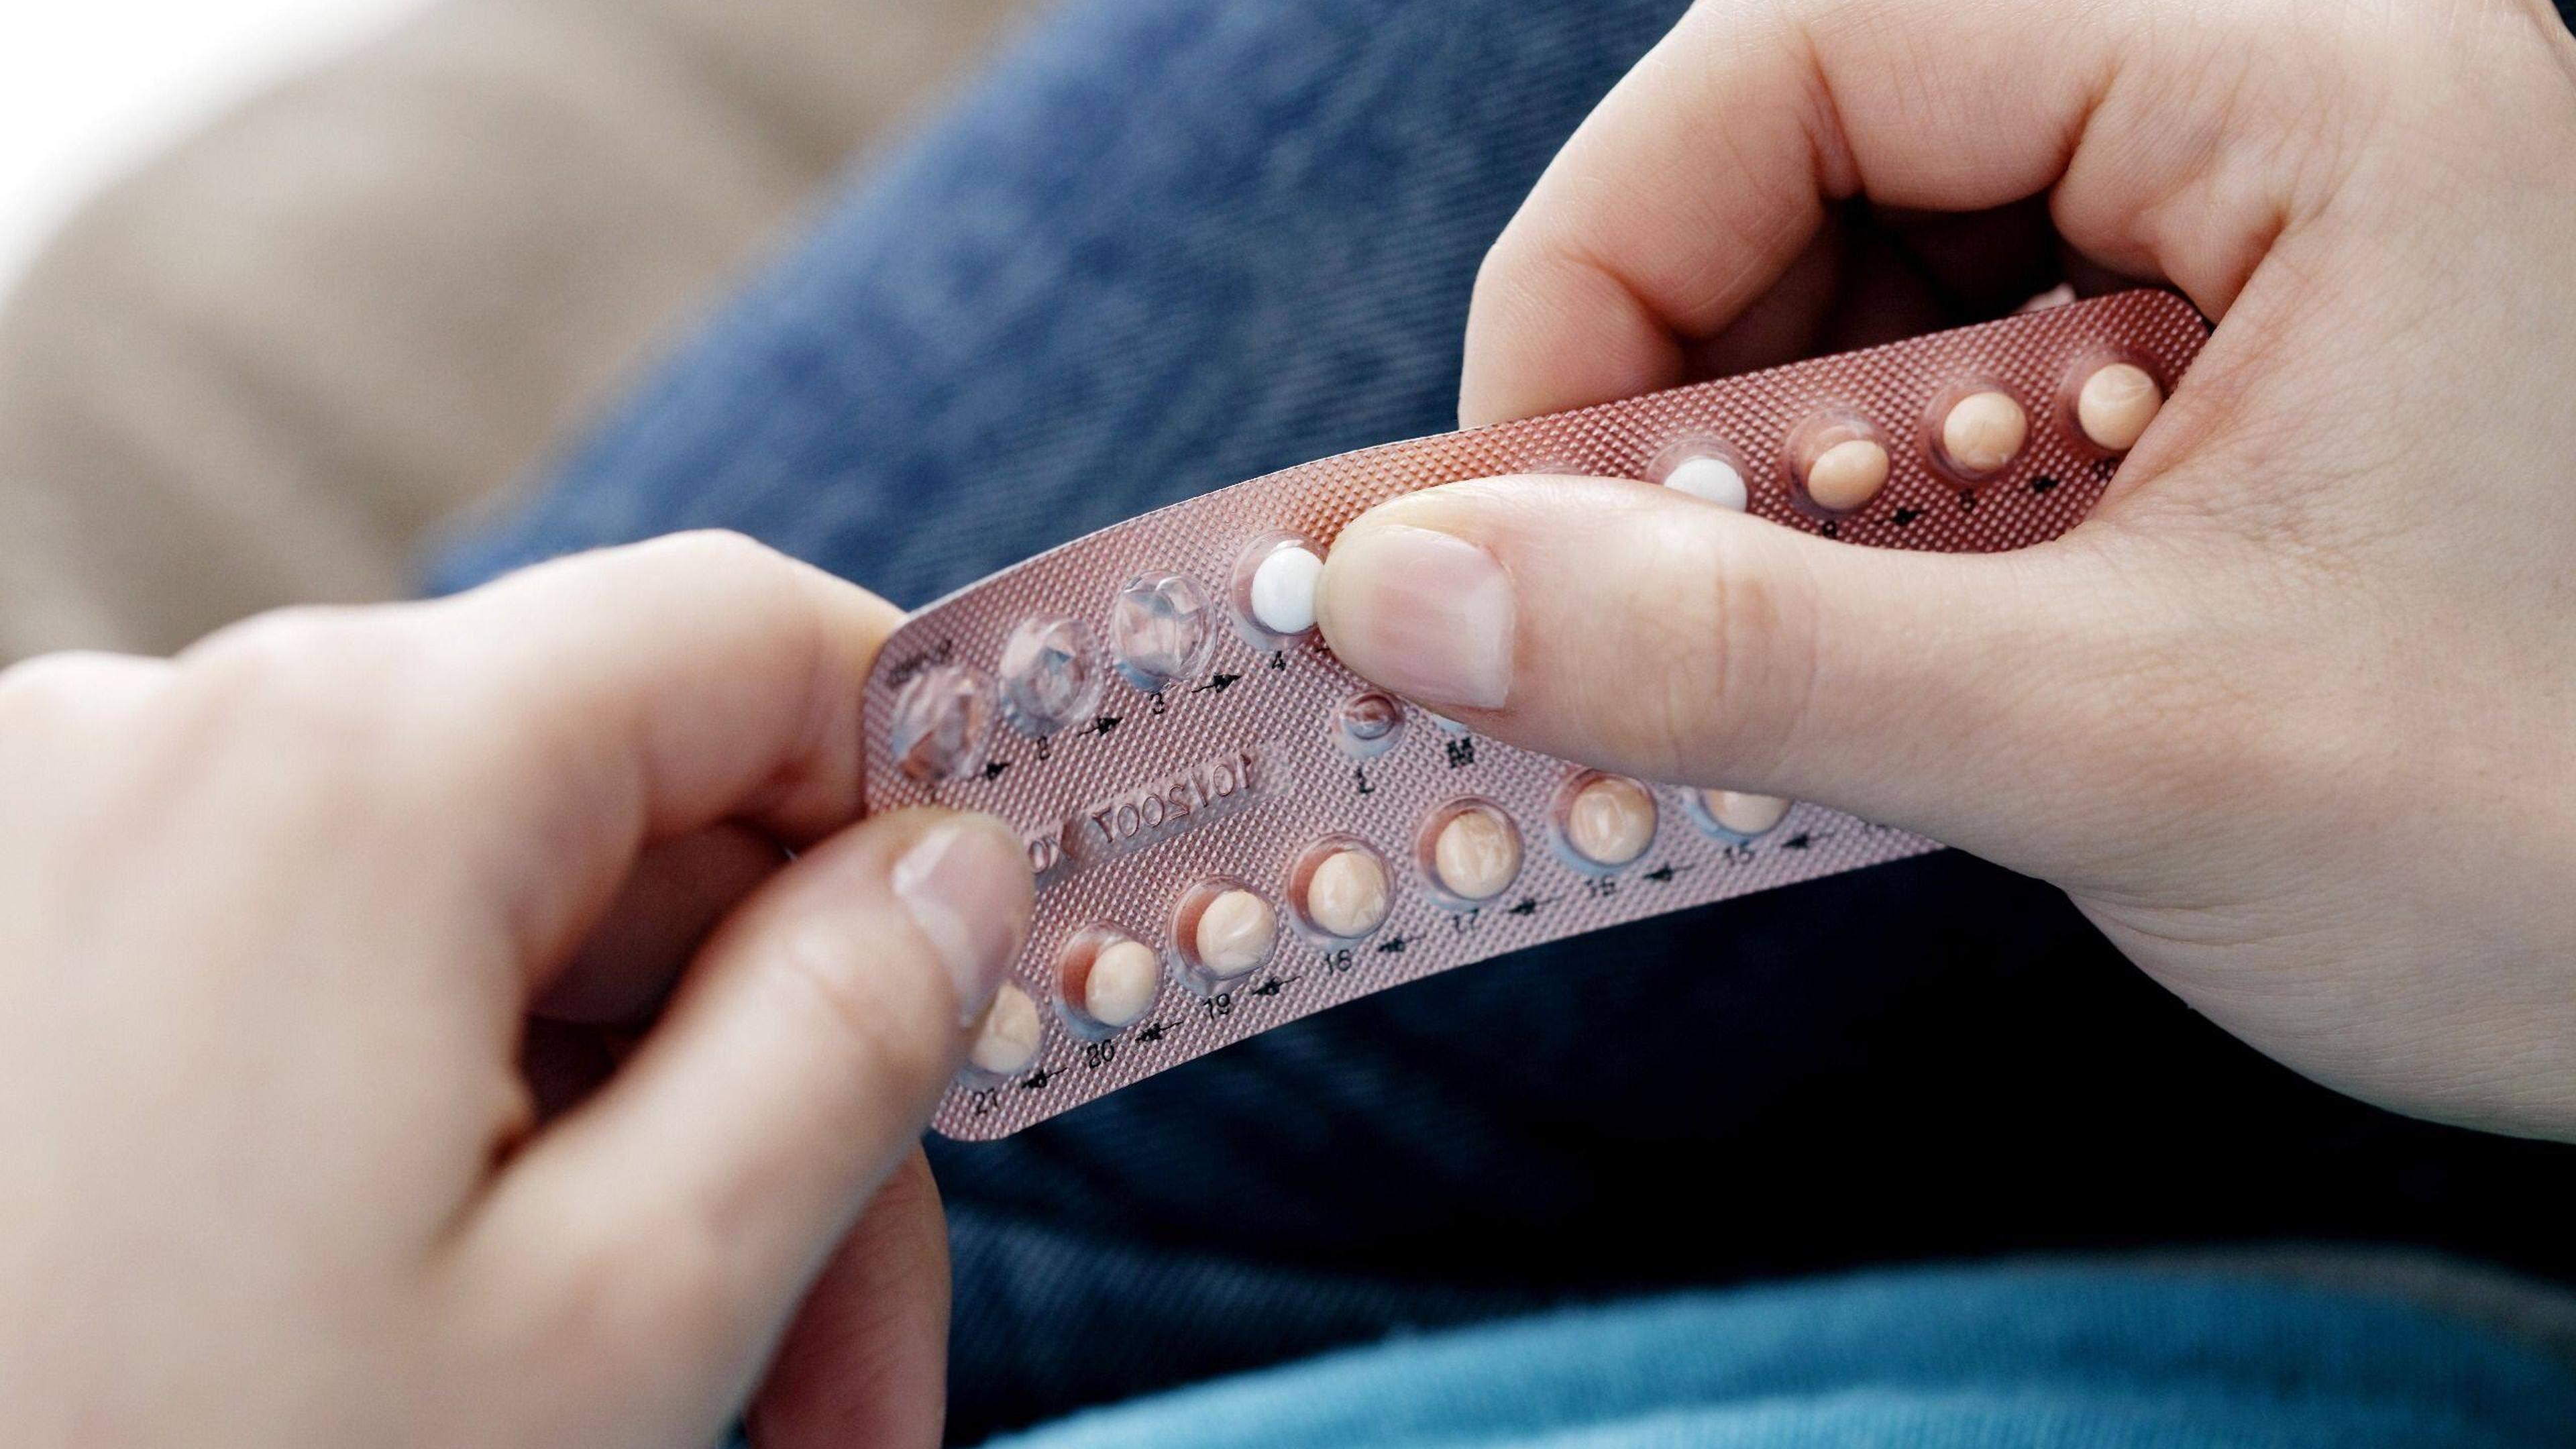 Contraception which will be fully reimbursed includes the pill, contraceptive patches and rings, injections, implants as well as vasectomy for men